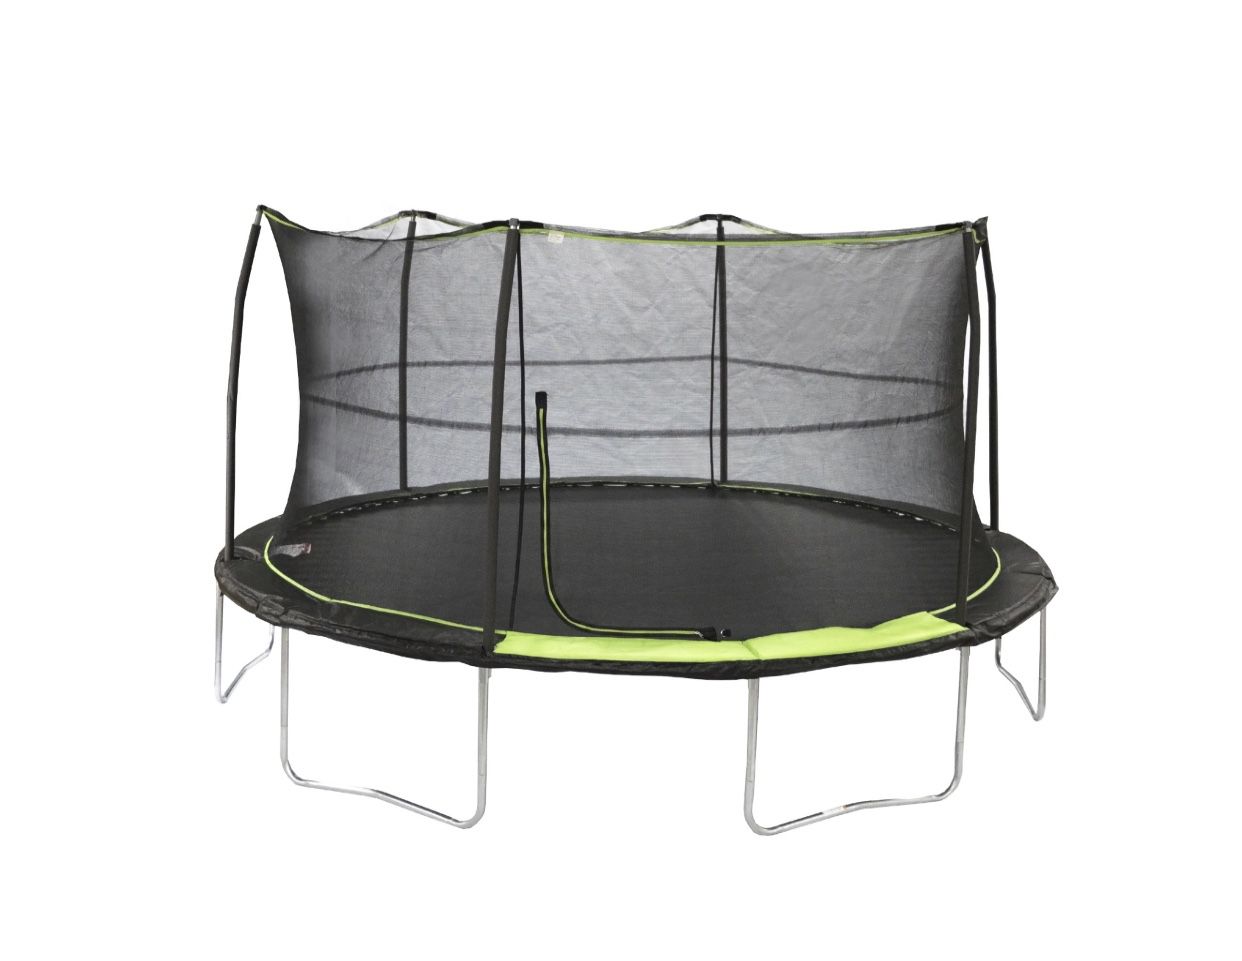 Brand new 14FT Trampoline ONLY ONE LEFT!!